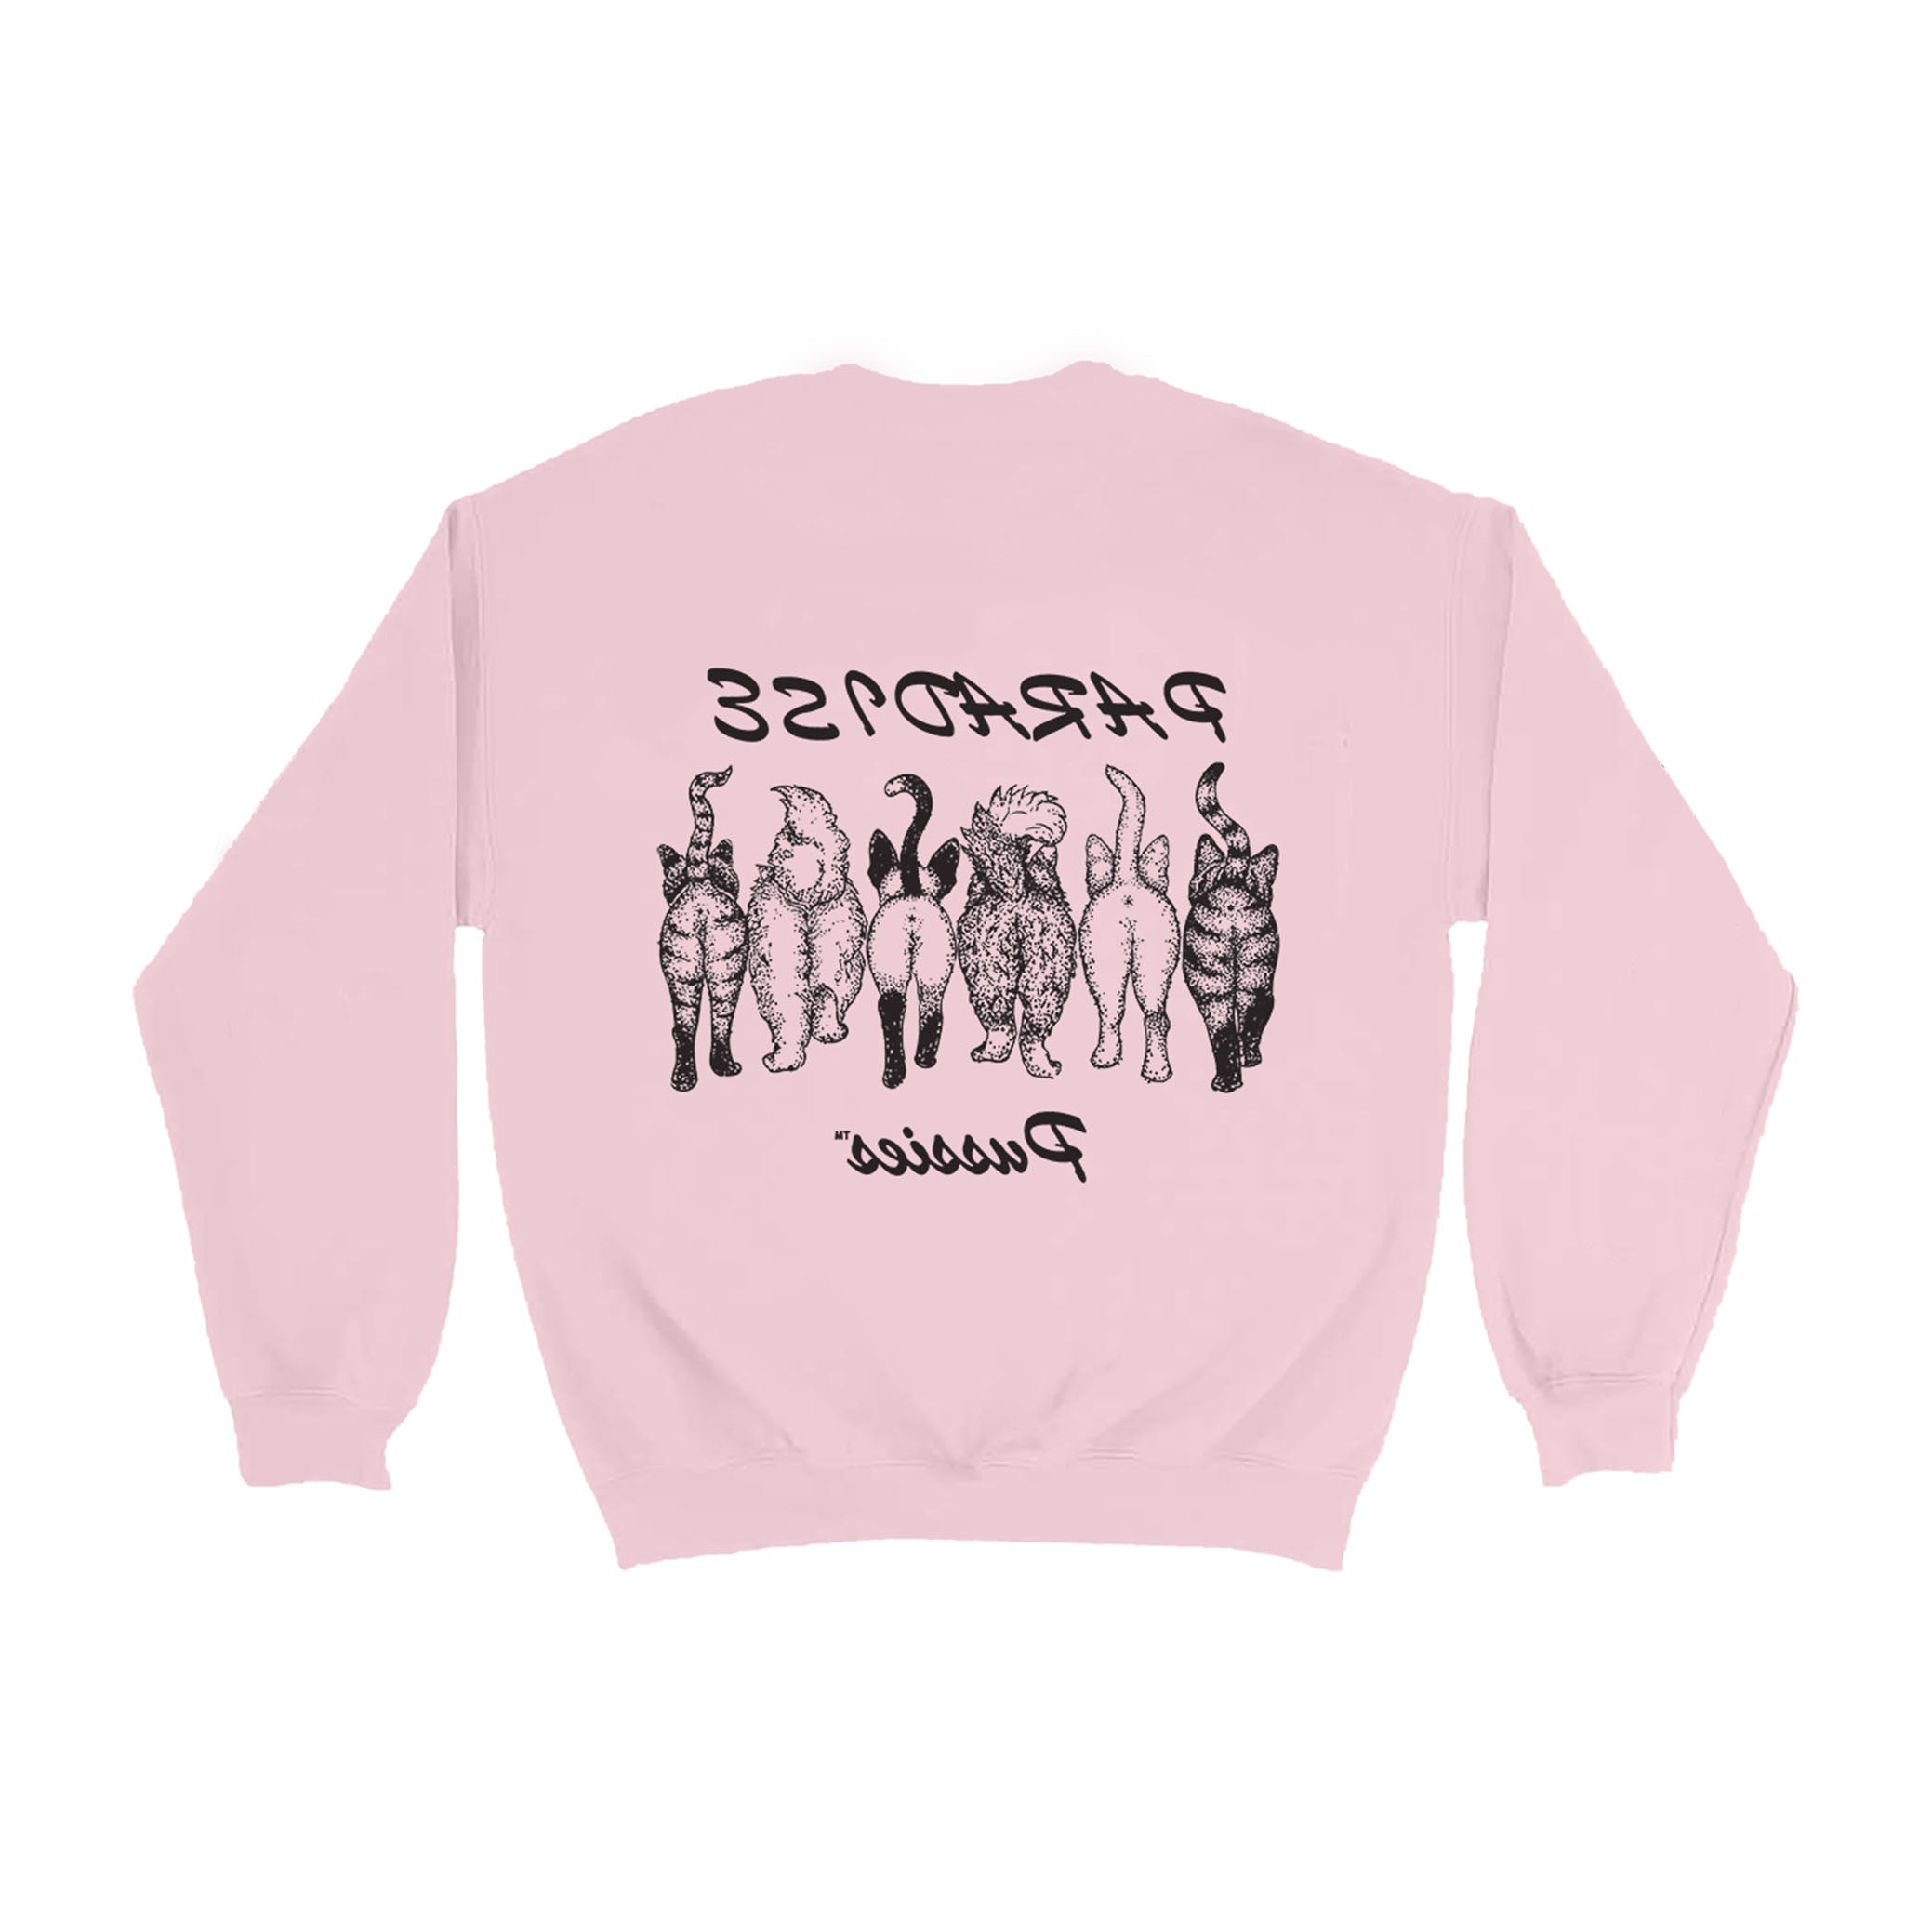 Paradise Pussies Crew, Pink